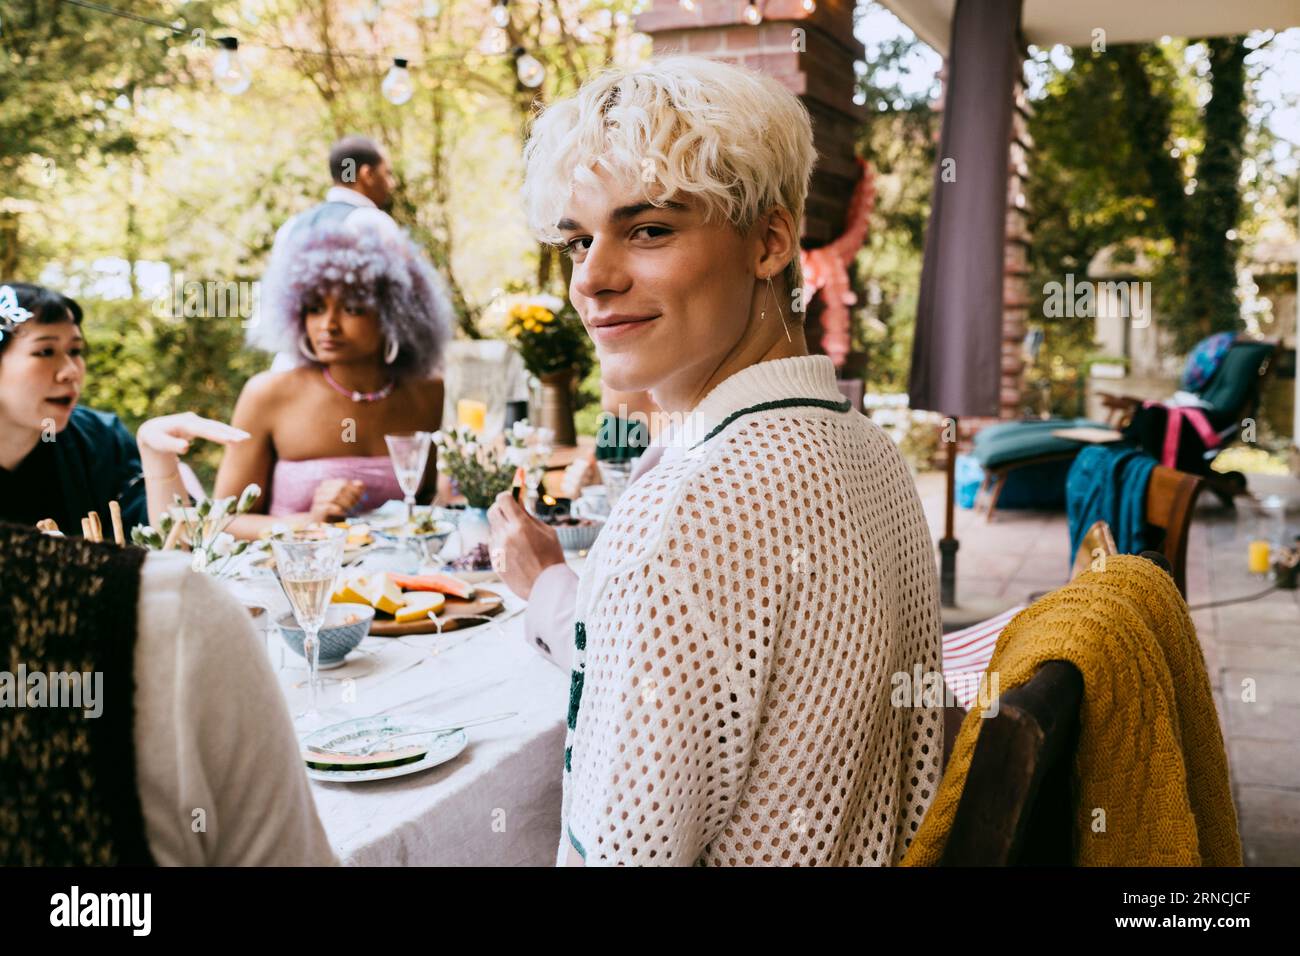 Portrait of smiling gay man with gray hair sitting amidst friends during dinner party in back yard Stock Photo